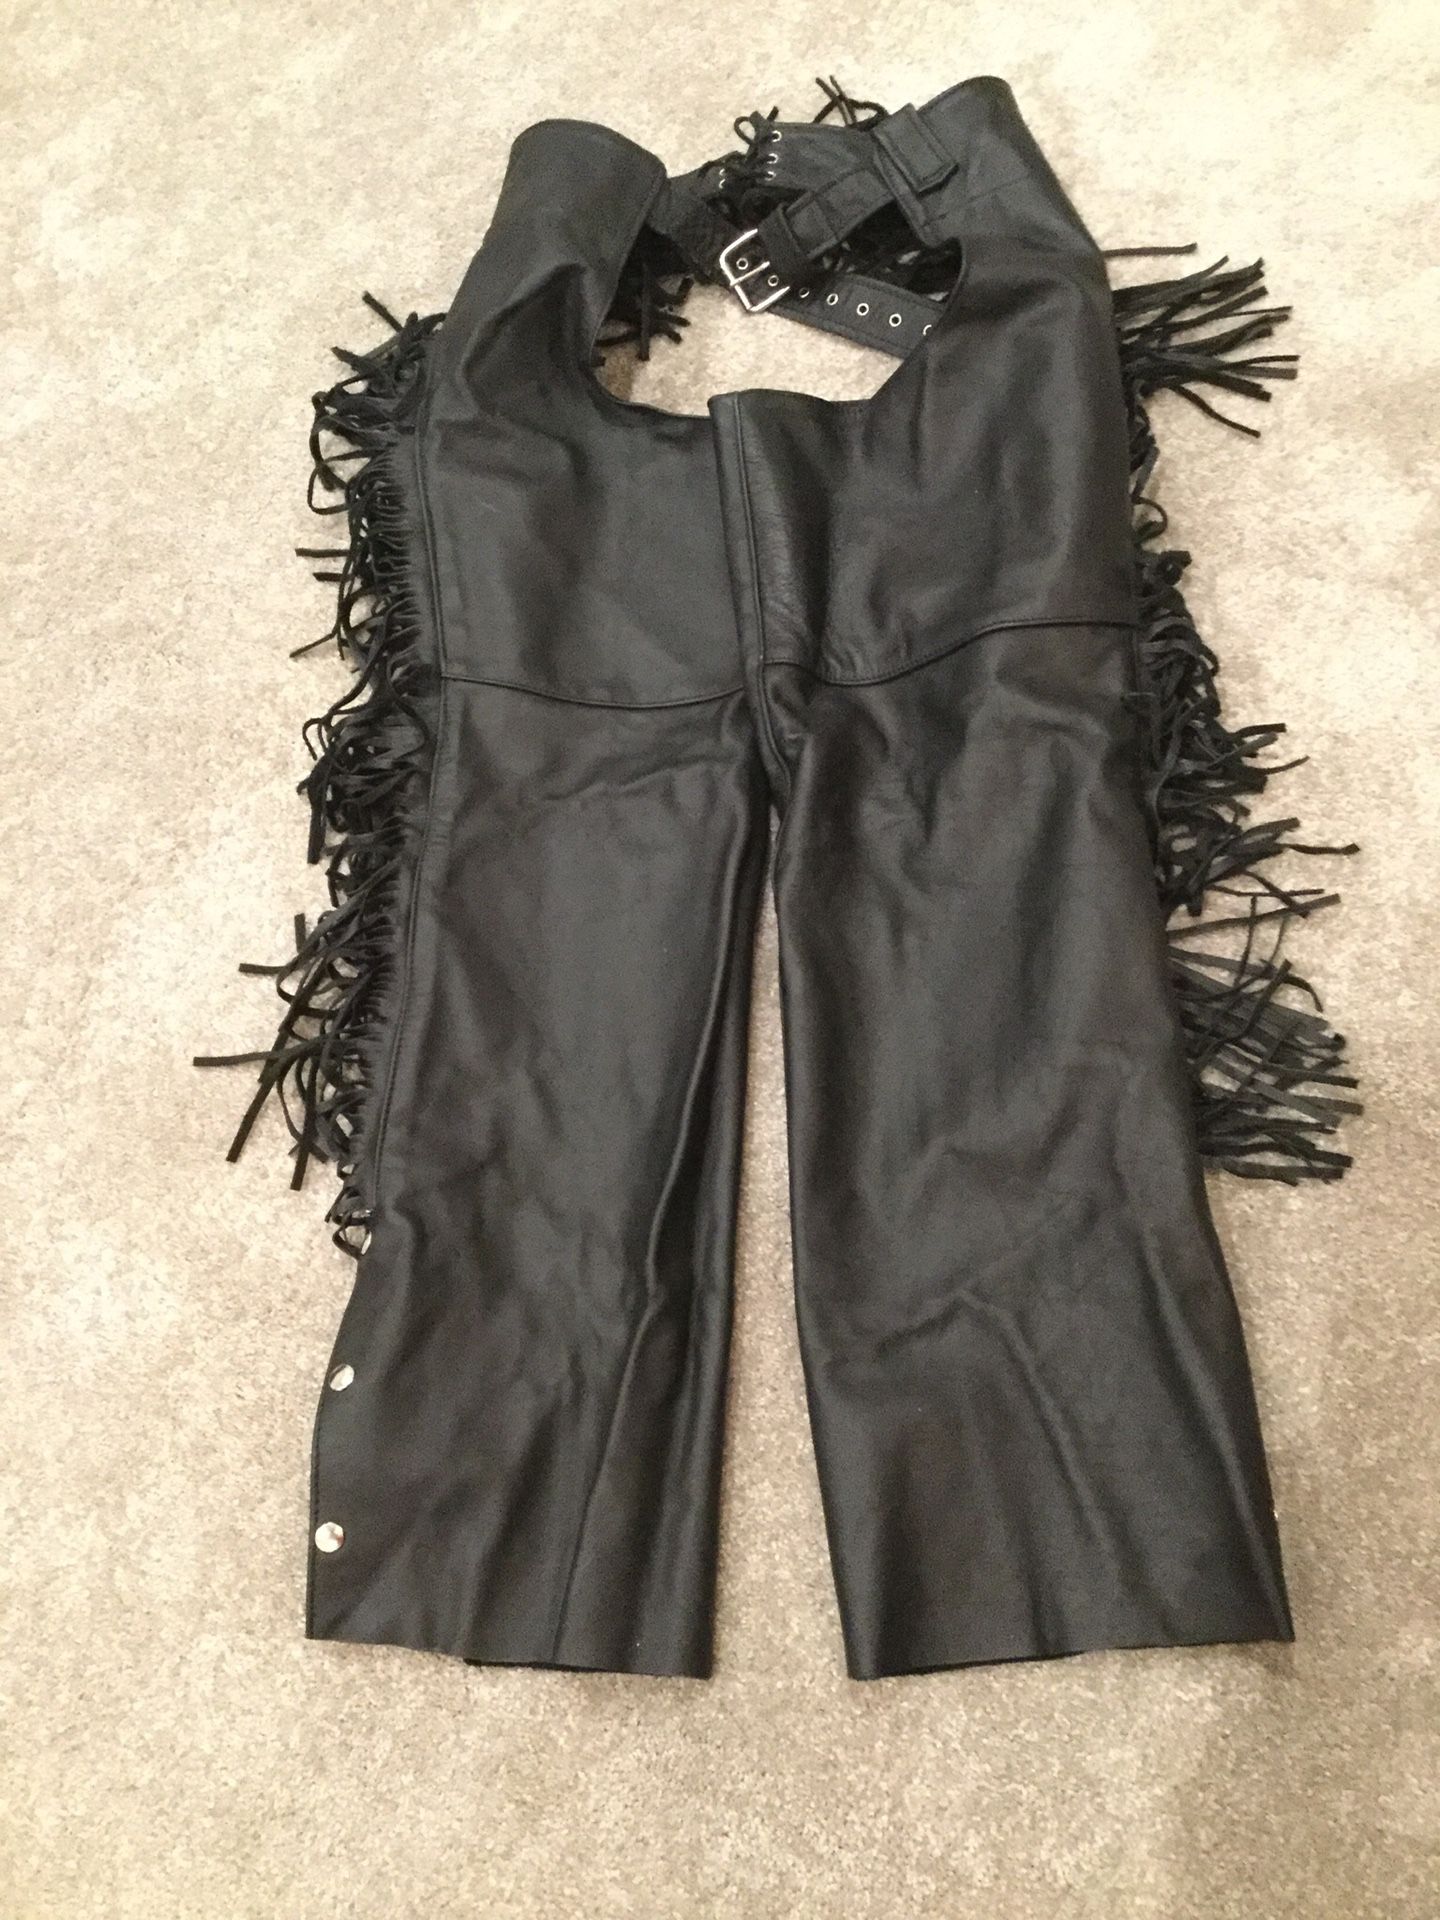 Women’s Leather Chaps with Fringes Sz XL